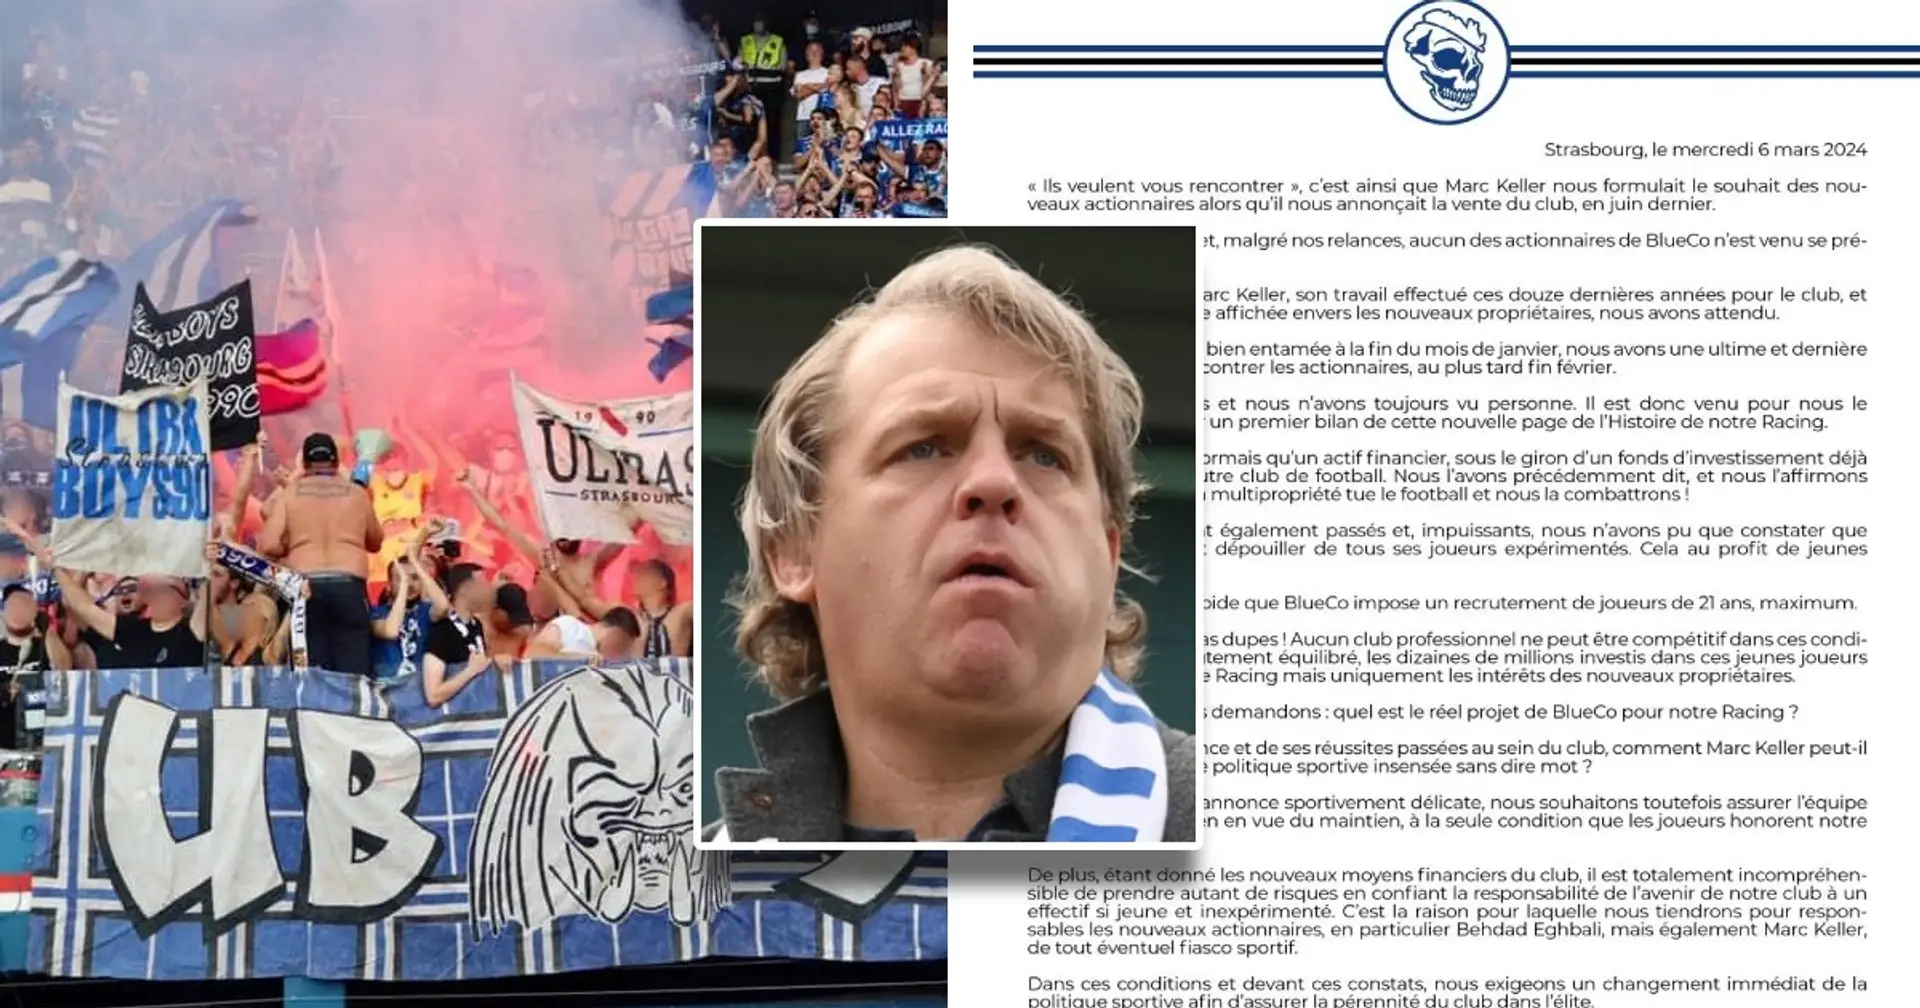 Furious Strasbourg ultras address letter to Boehly ownership – their problems are similar to Chelsea's